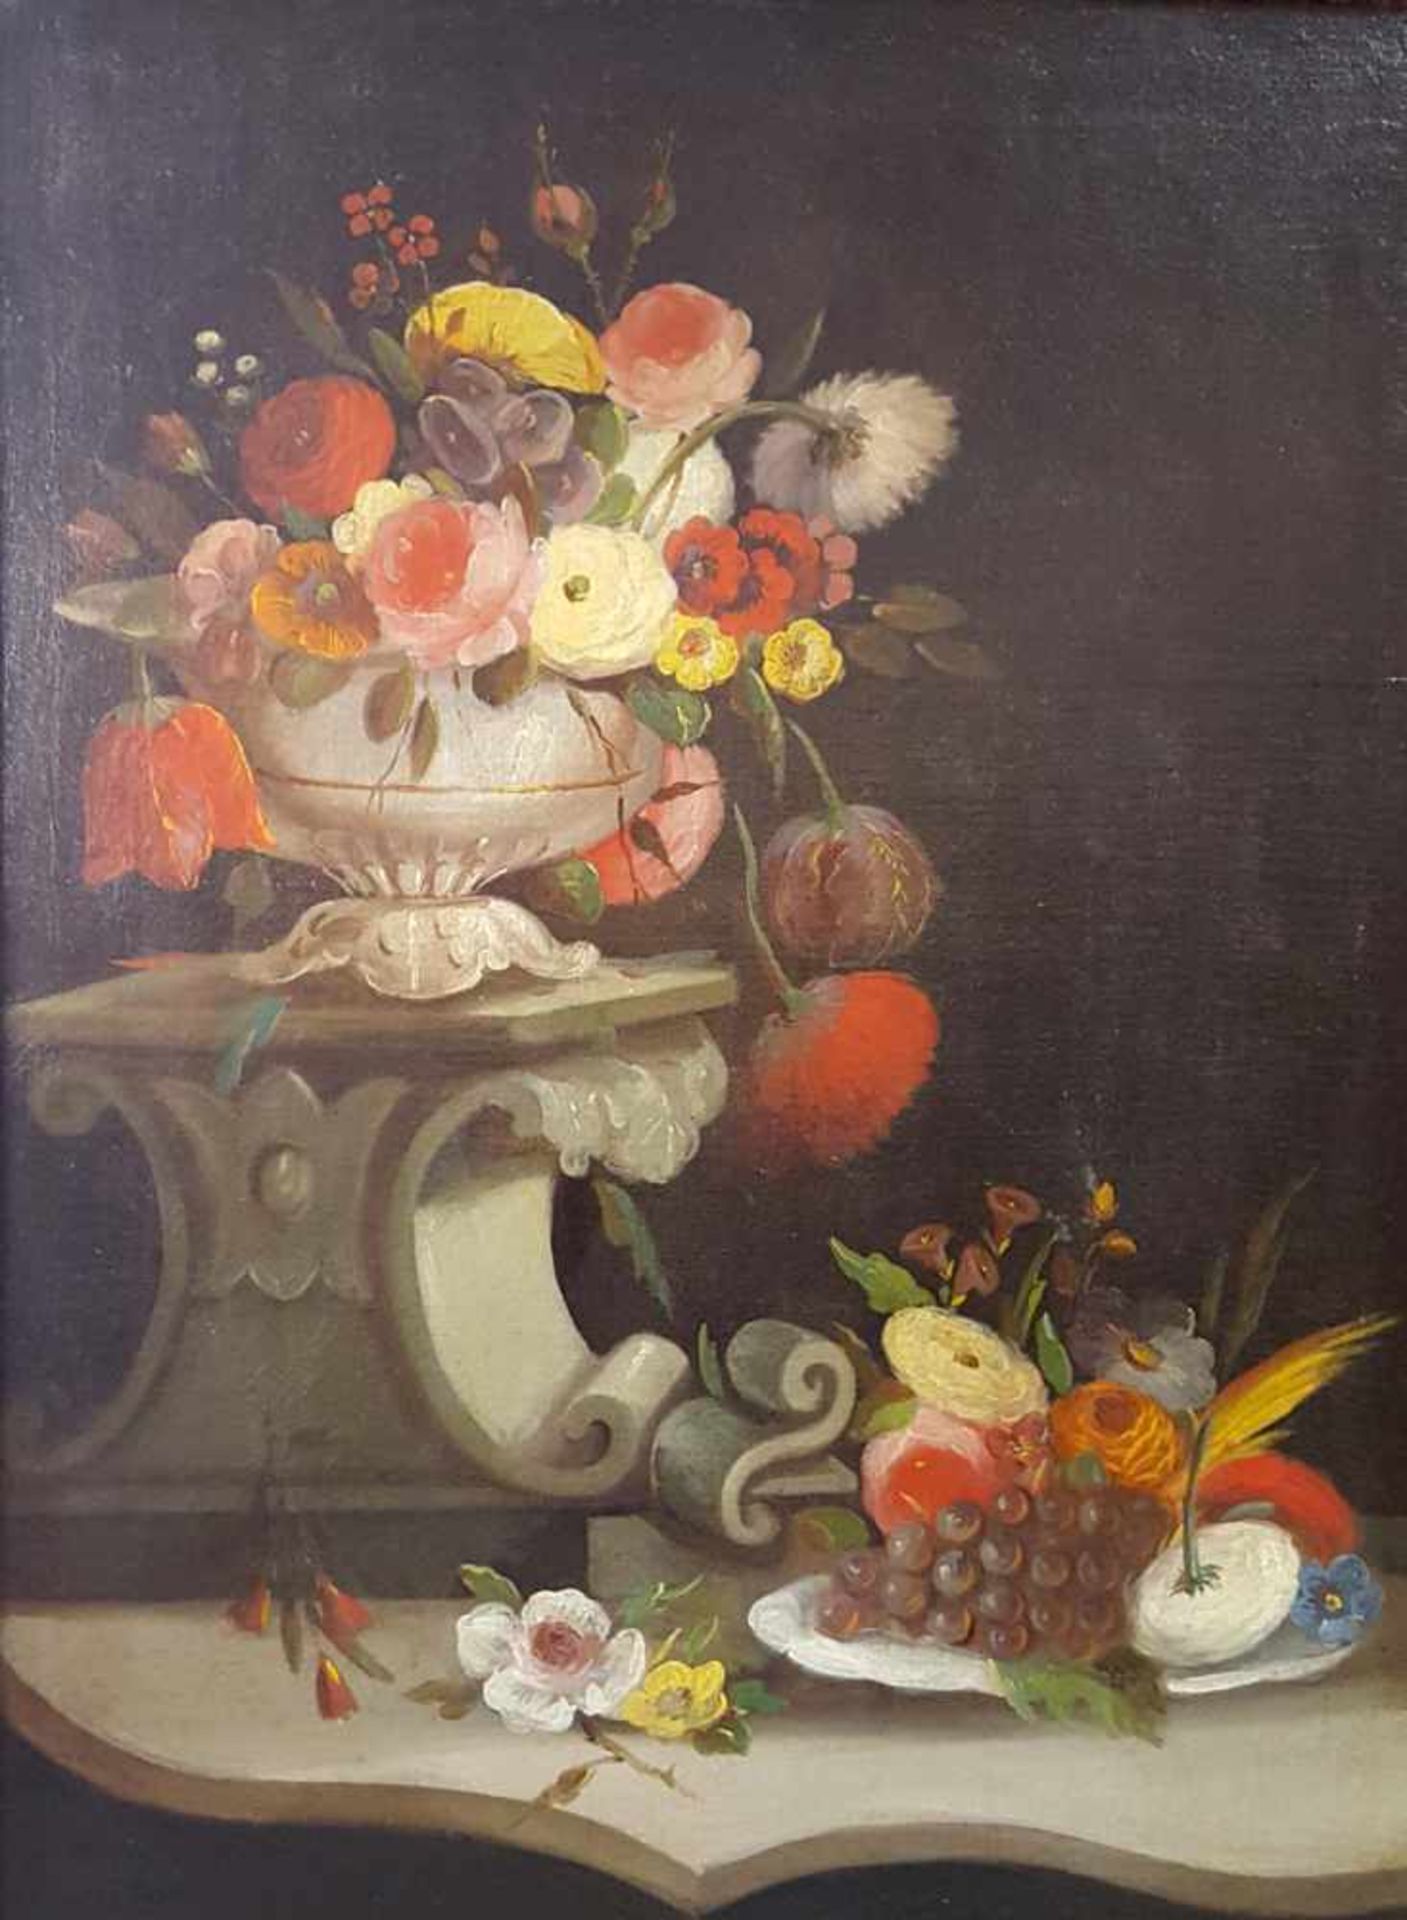 UNSIGNED (XVIII). Two still lifes with flowers, fruits and architectural elements. - Bild 2 aus 4